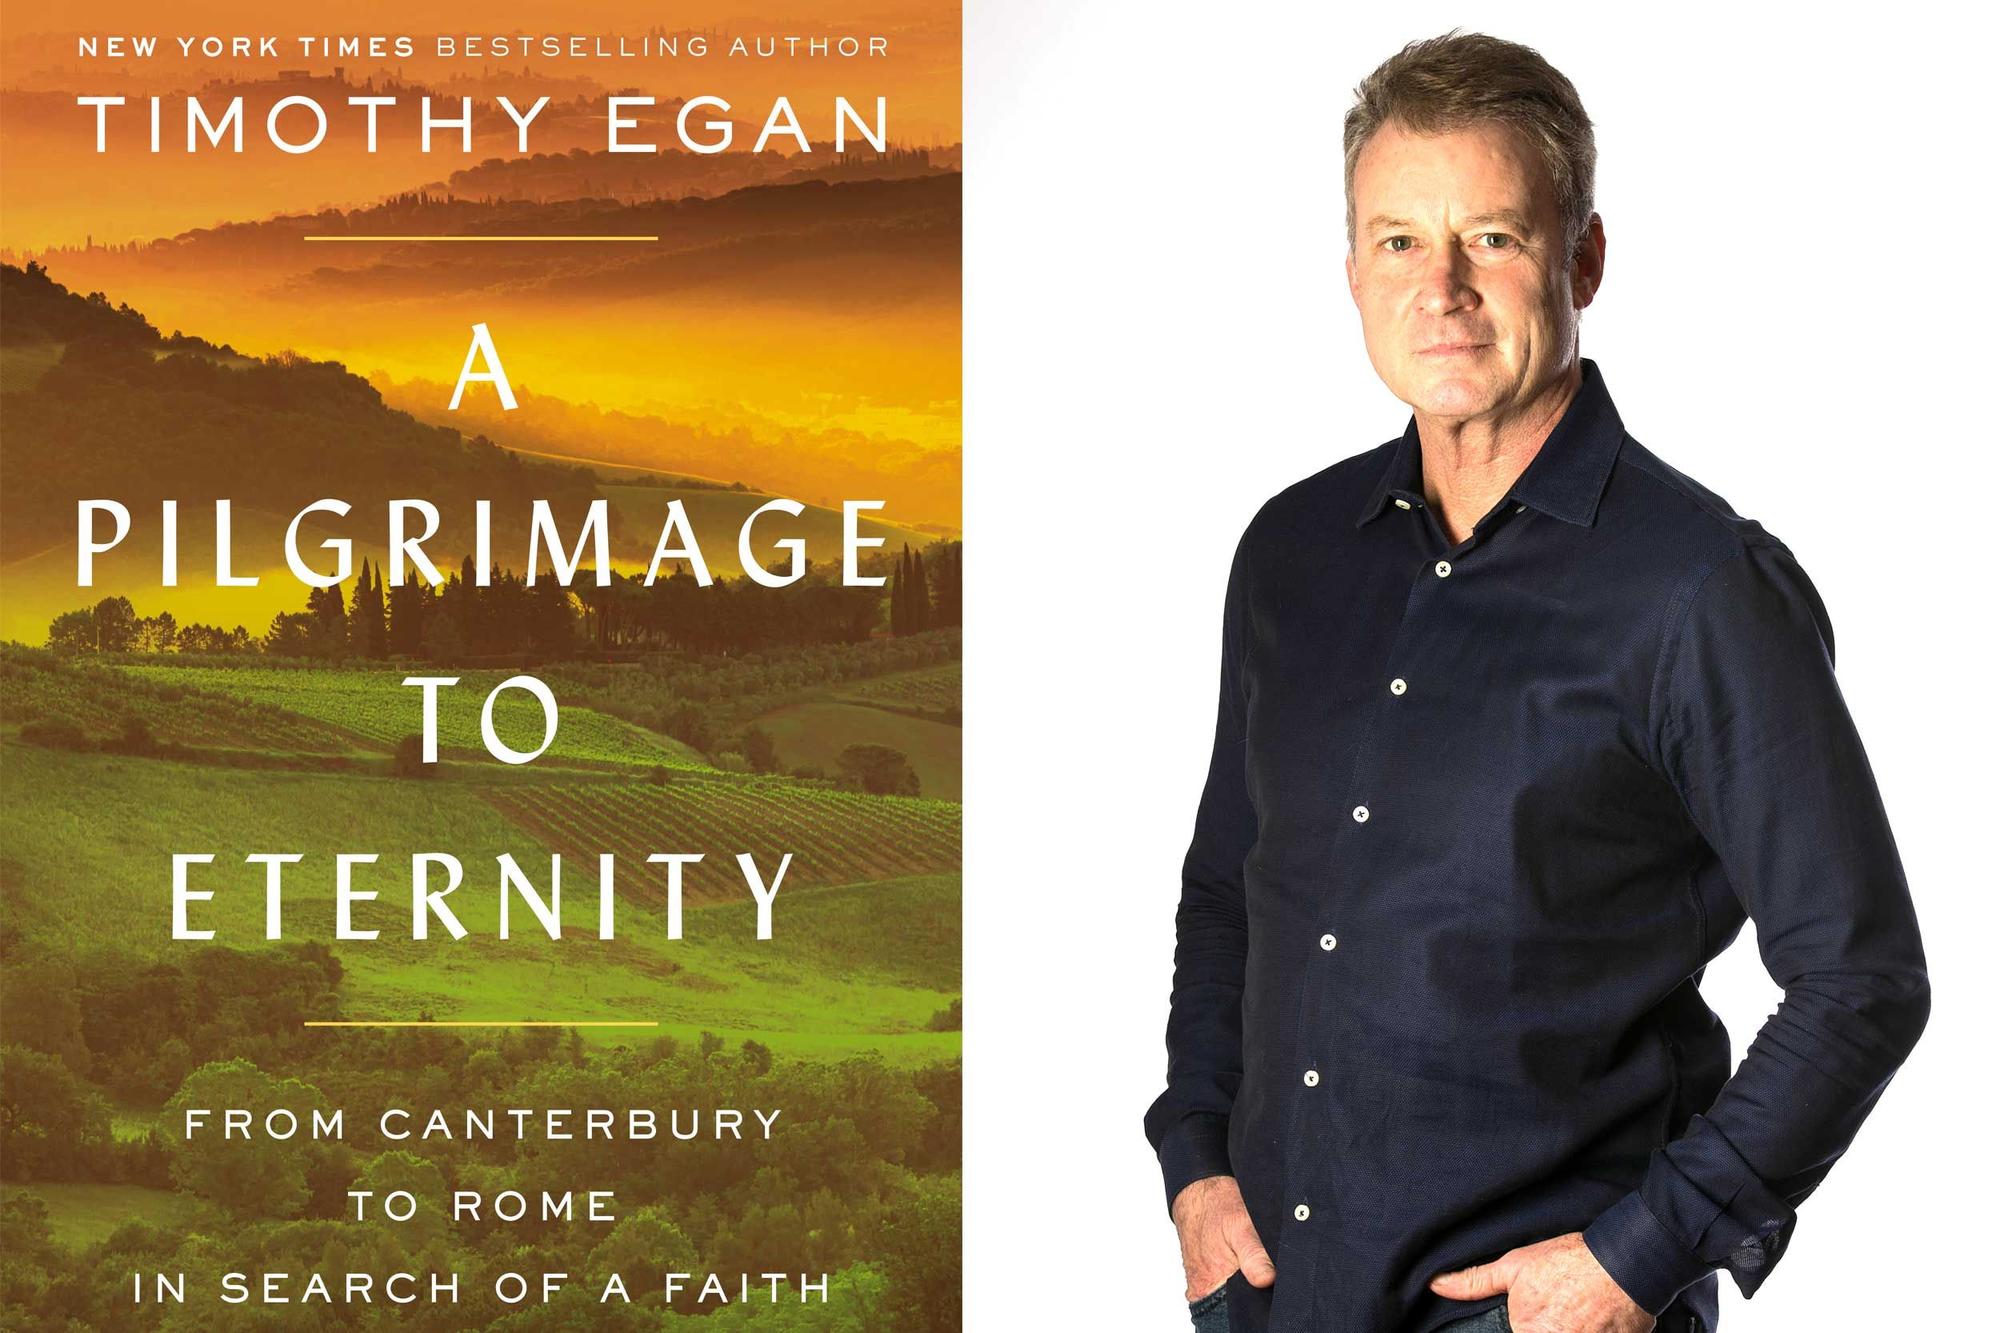 Seattle author Timothy Egan walks an ancient route to find faith in the  future